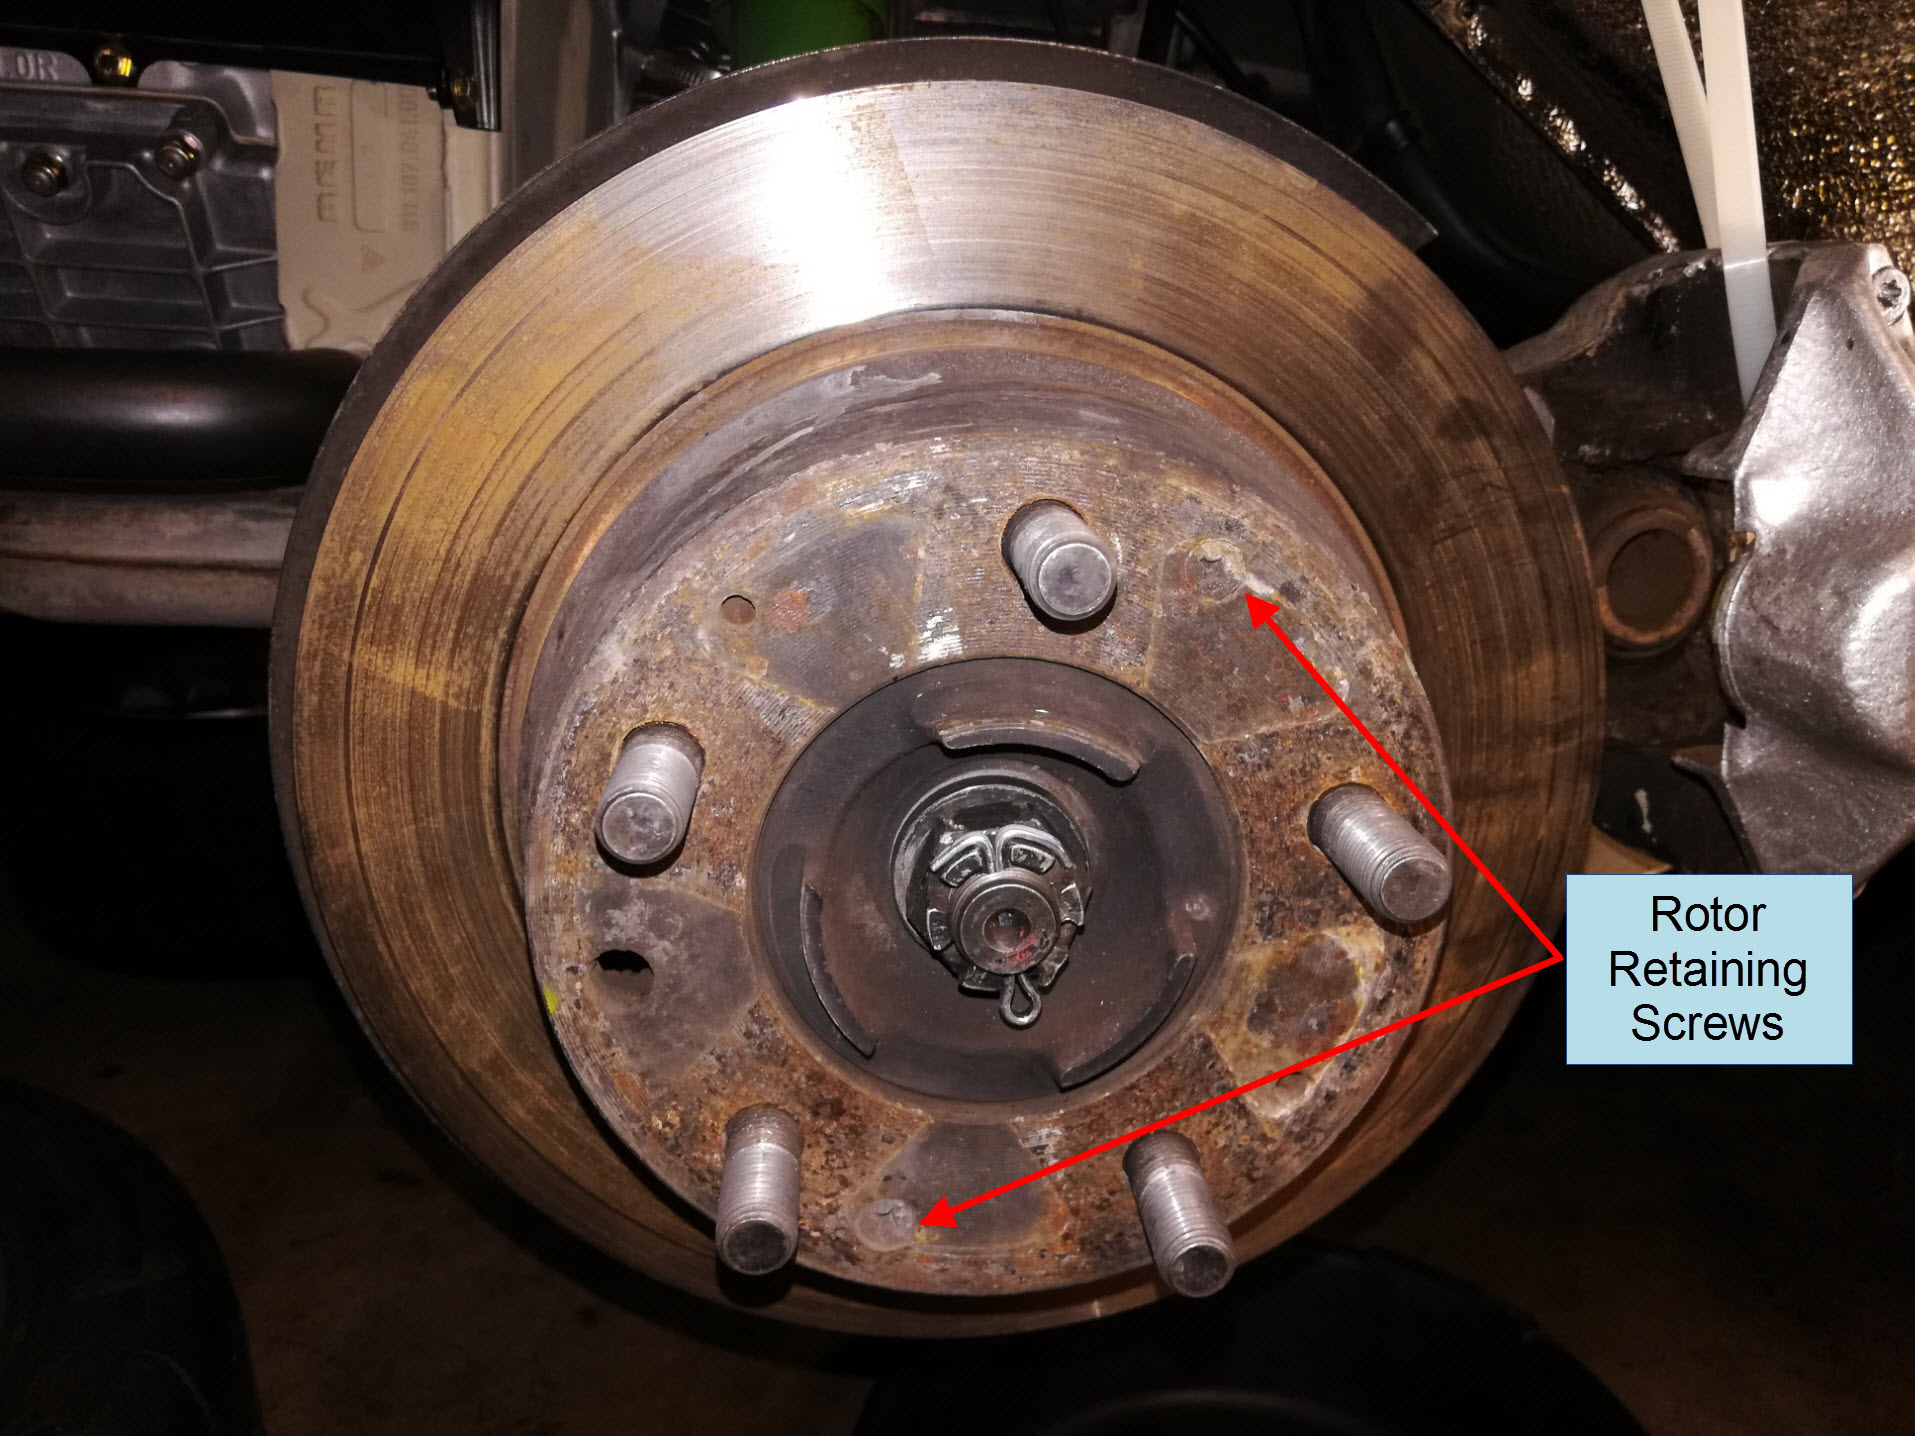 Air-cooled Porsche 911 rear brake rotor removal.